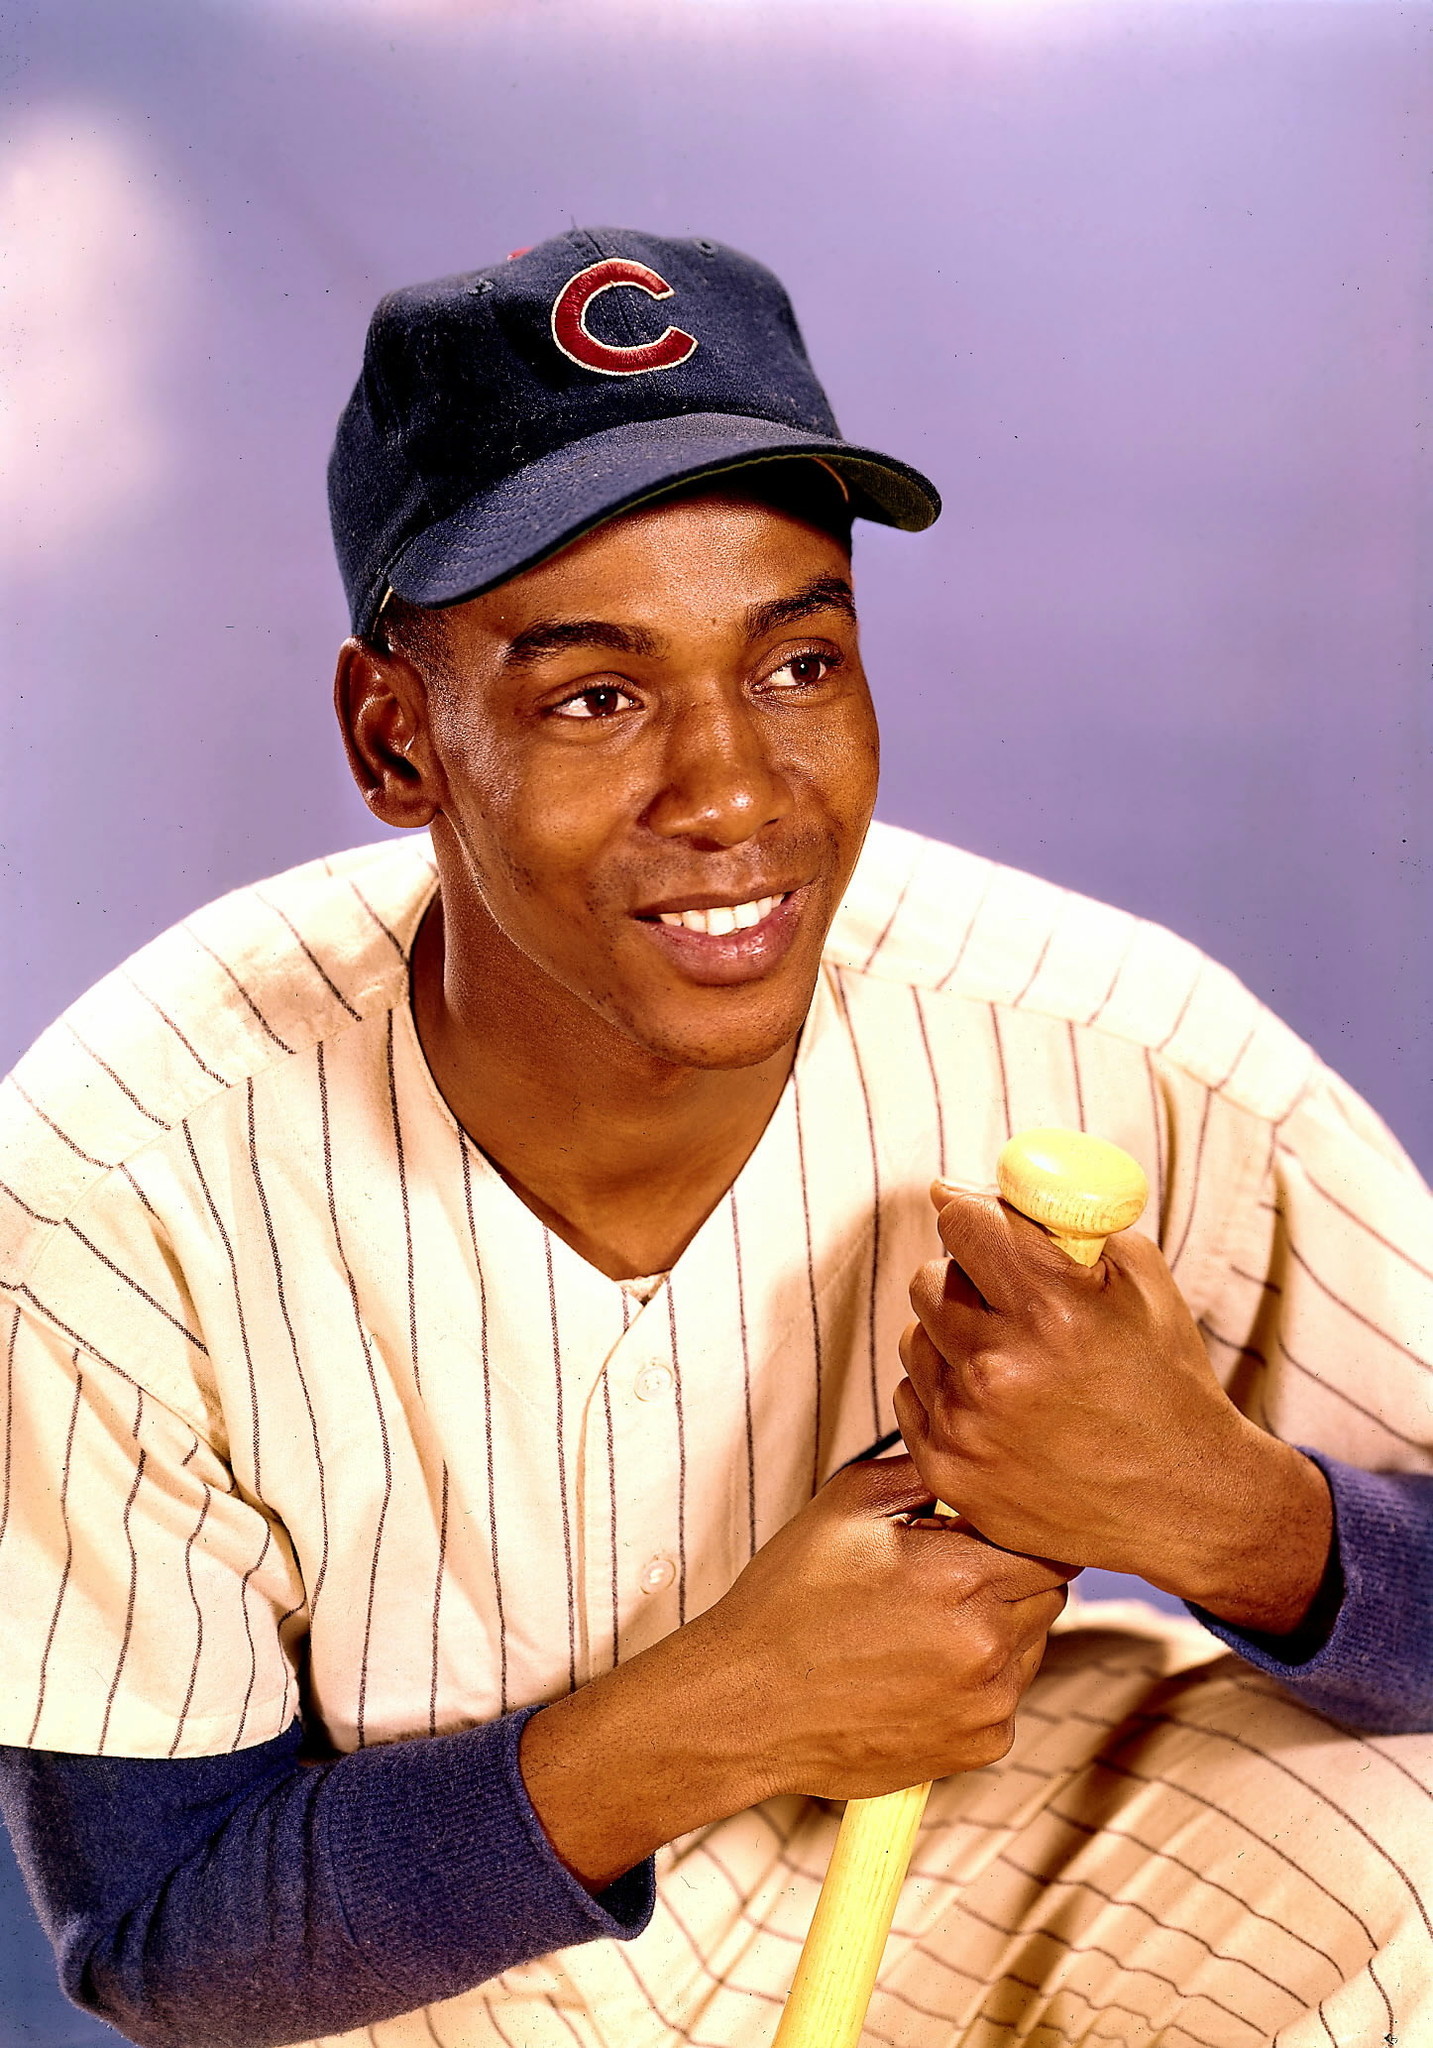 May 12, 1970: 'Mr. Cub' Ernie Banks reaches milestone with 500th homer –  Society for American Baseball Research